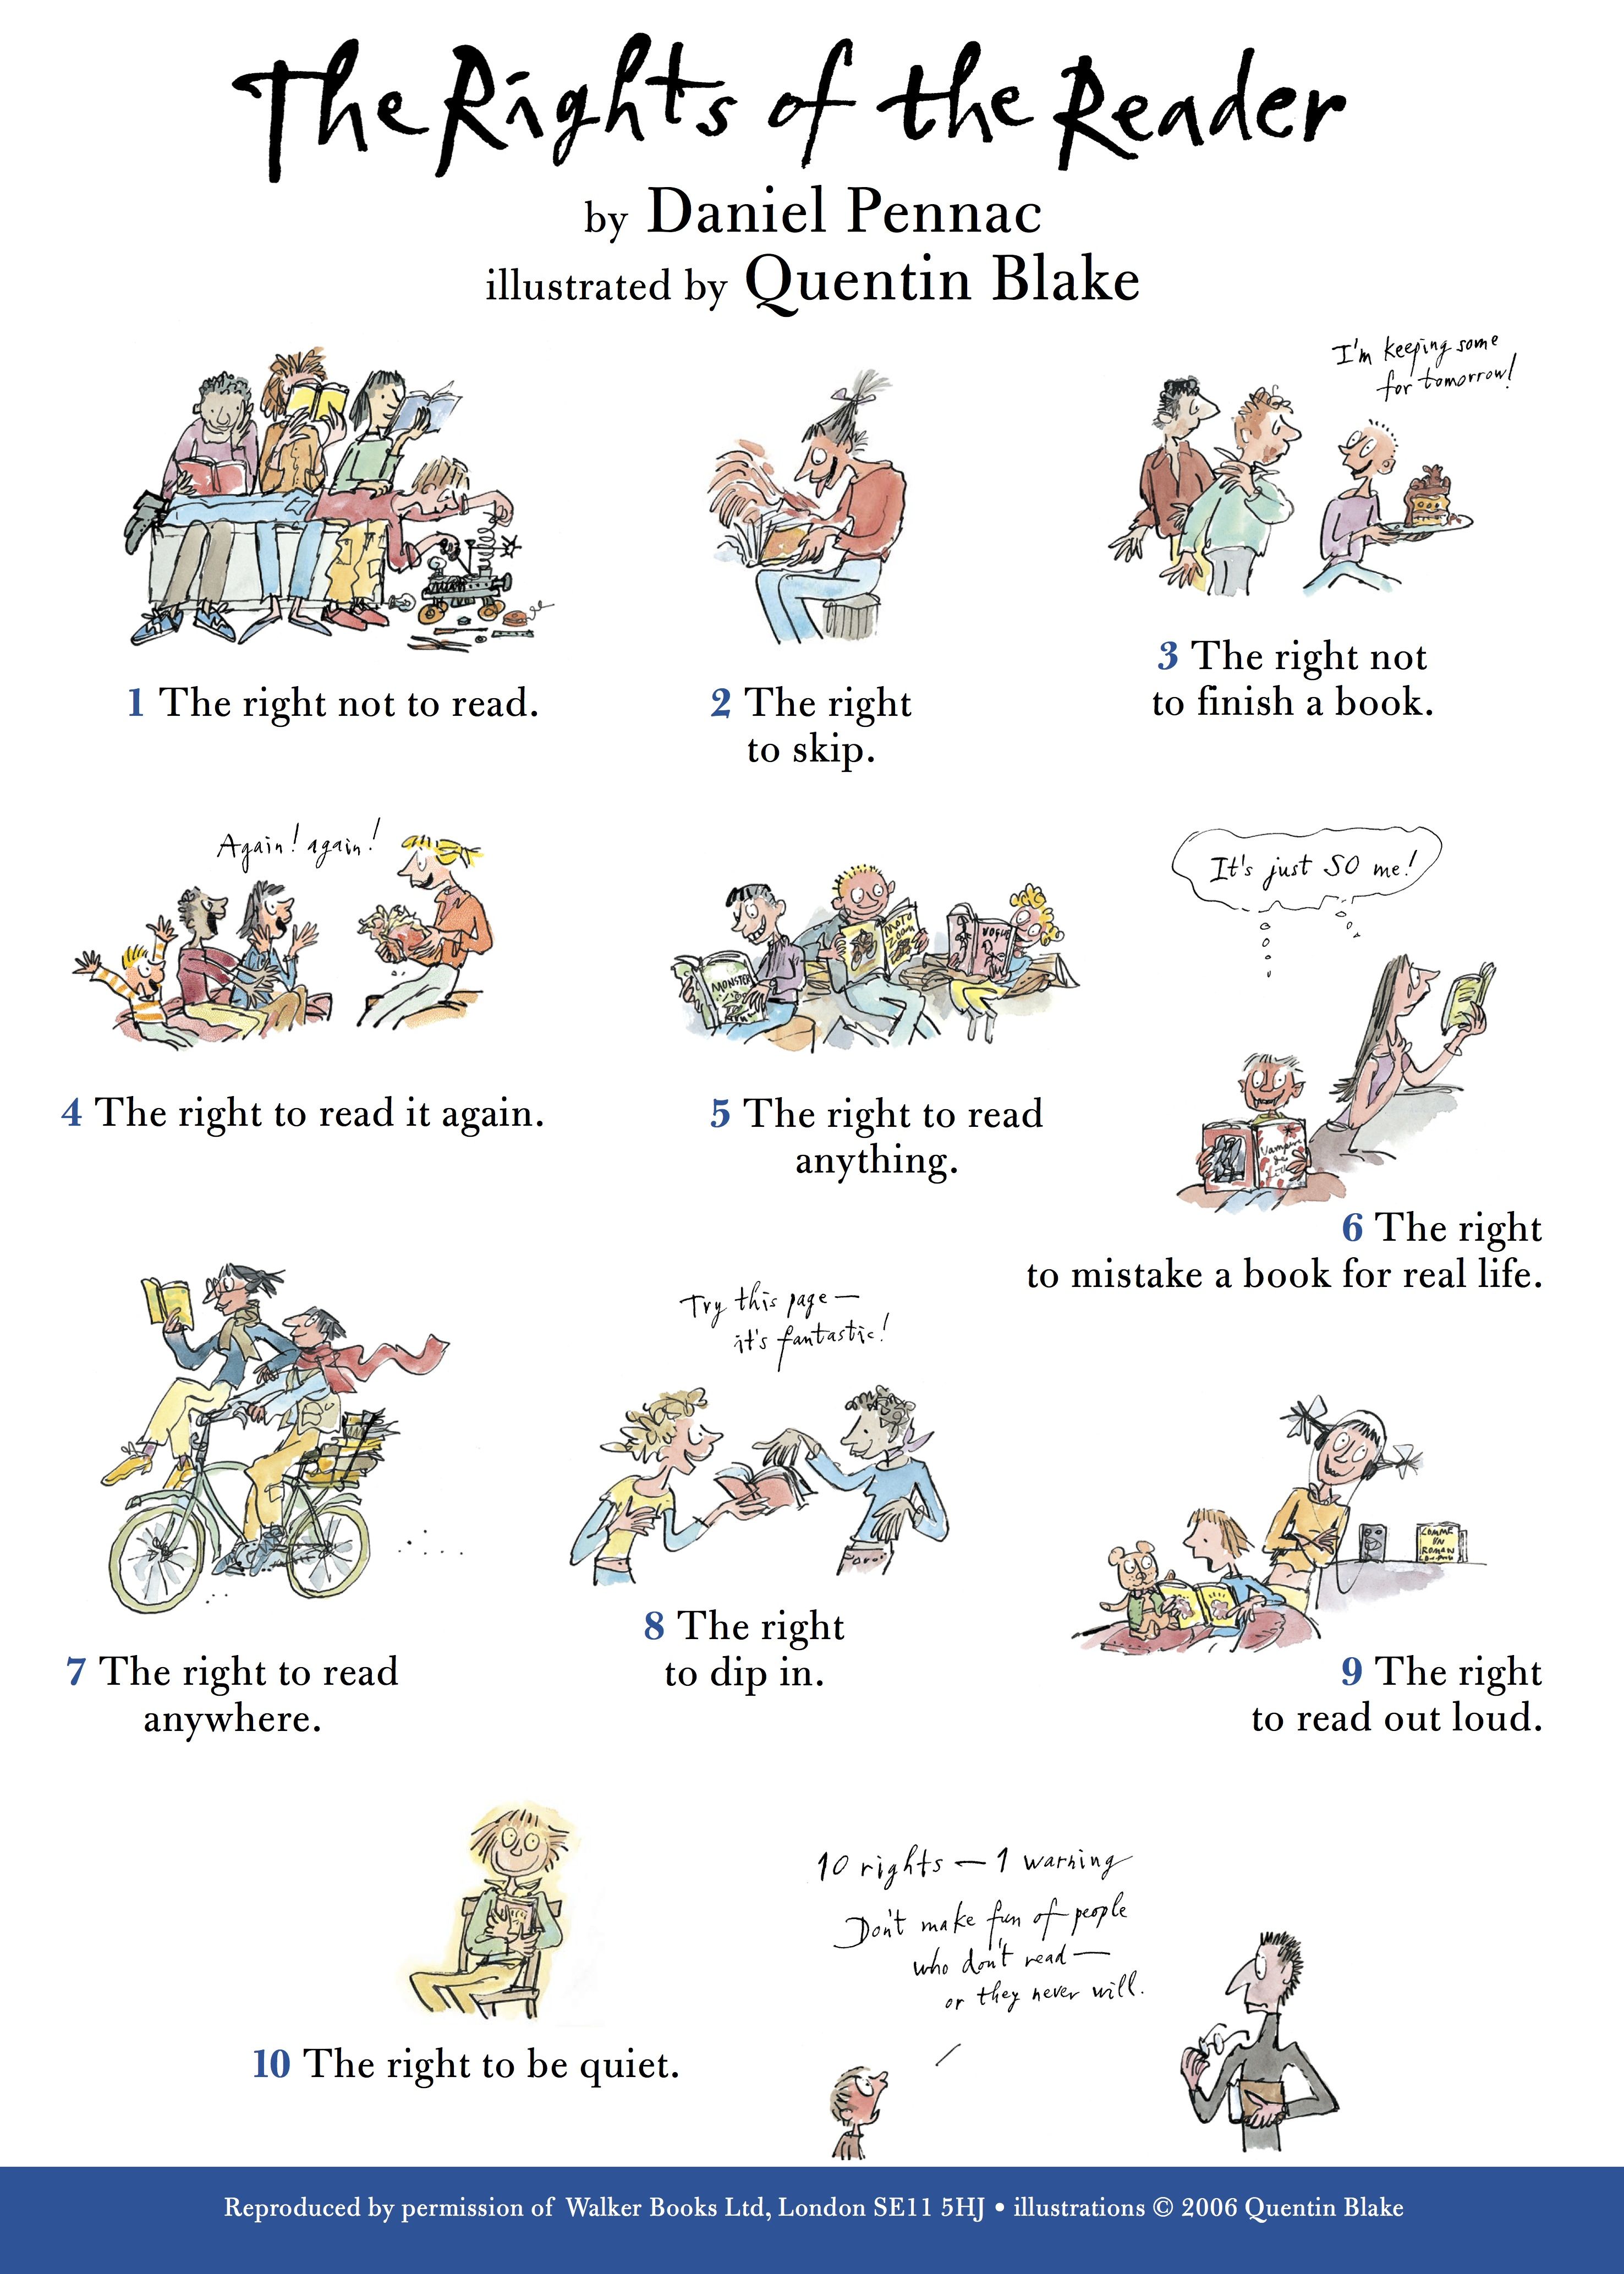 The rights of the reader